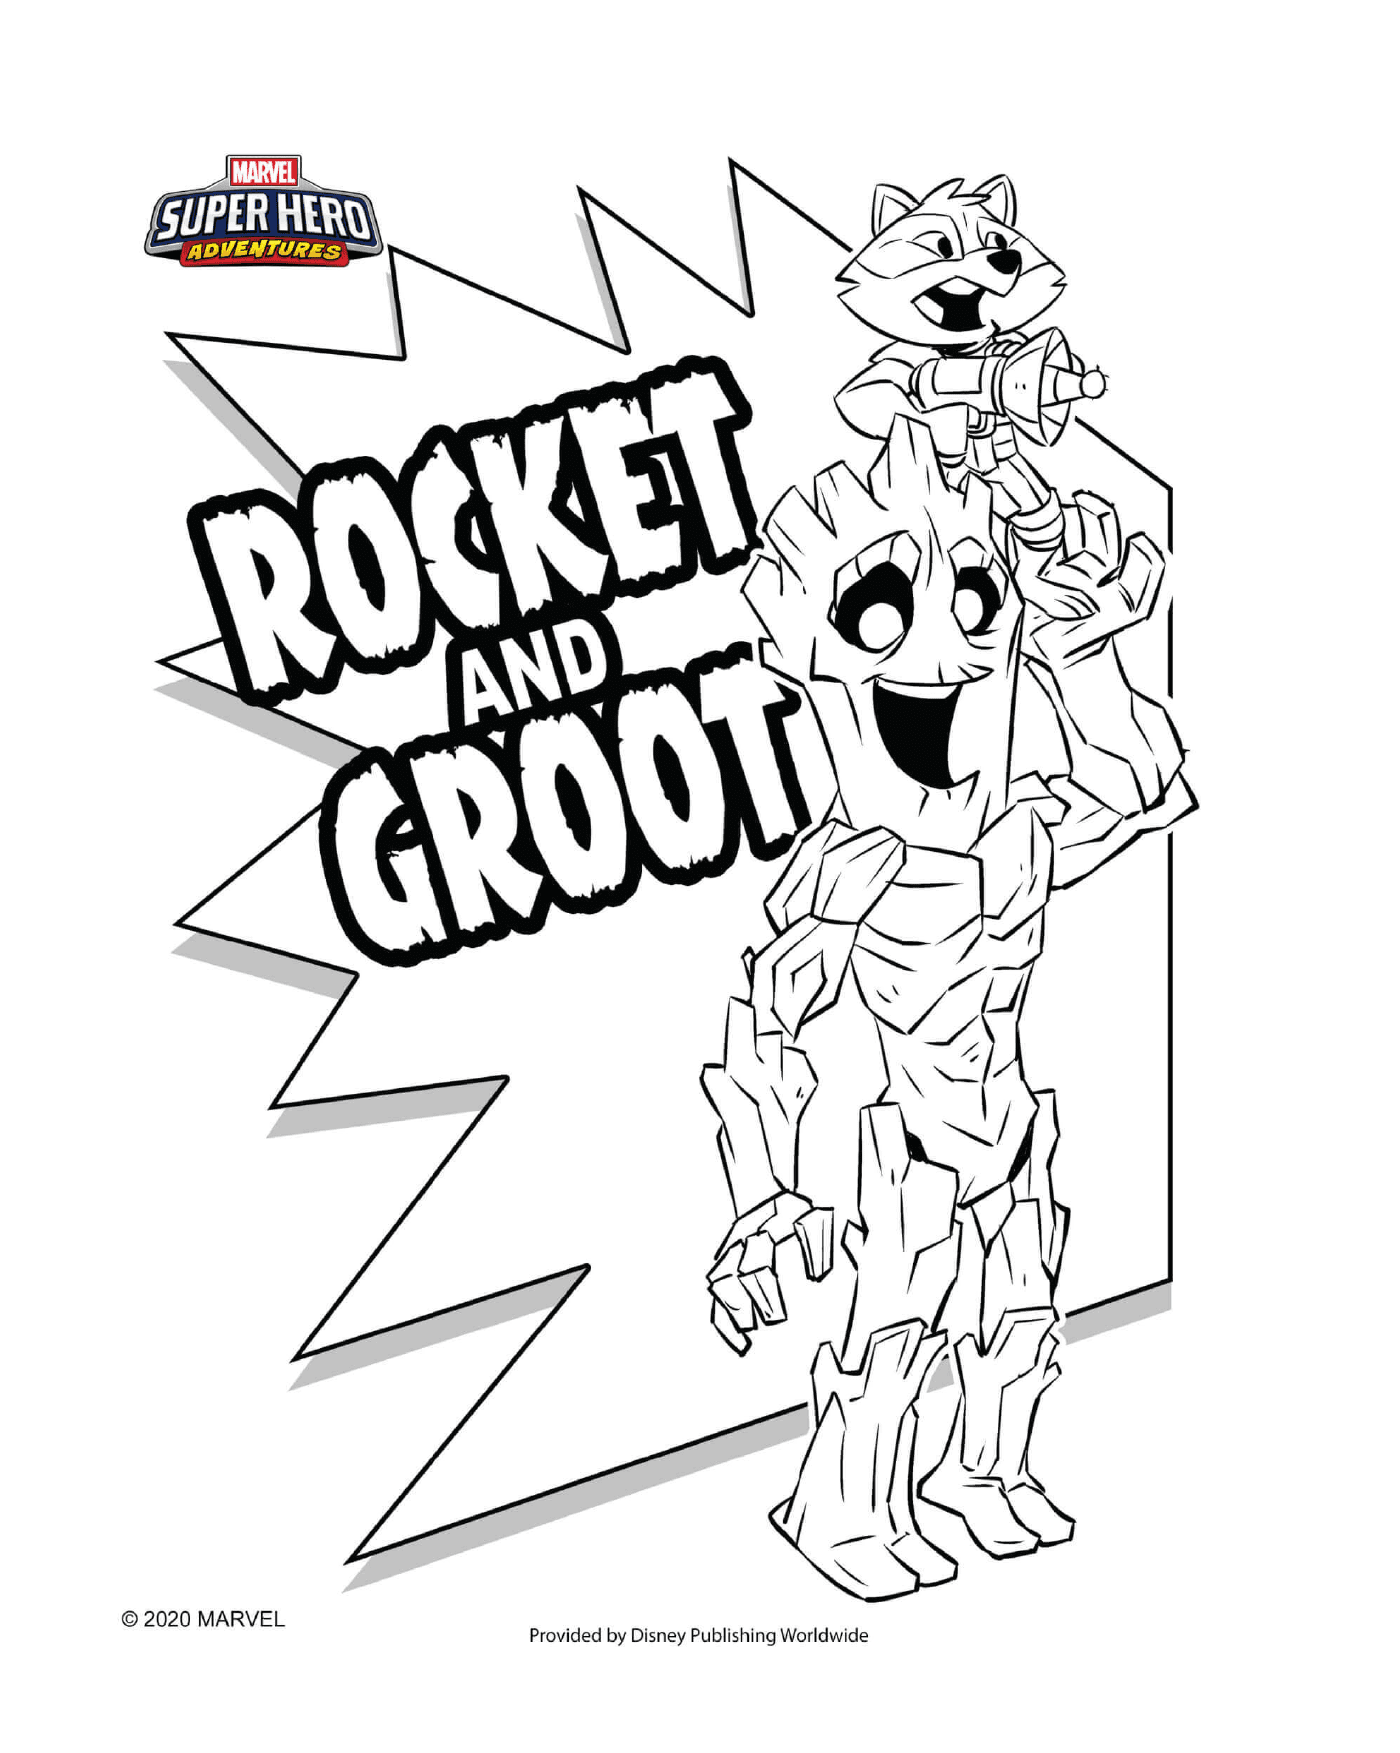  Rocket and Groot, supereroi 